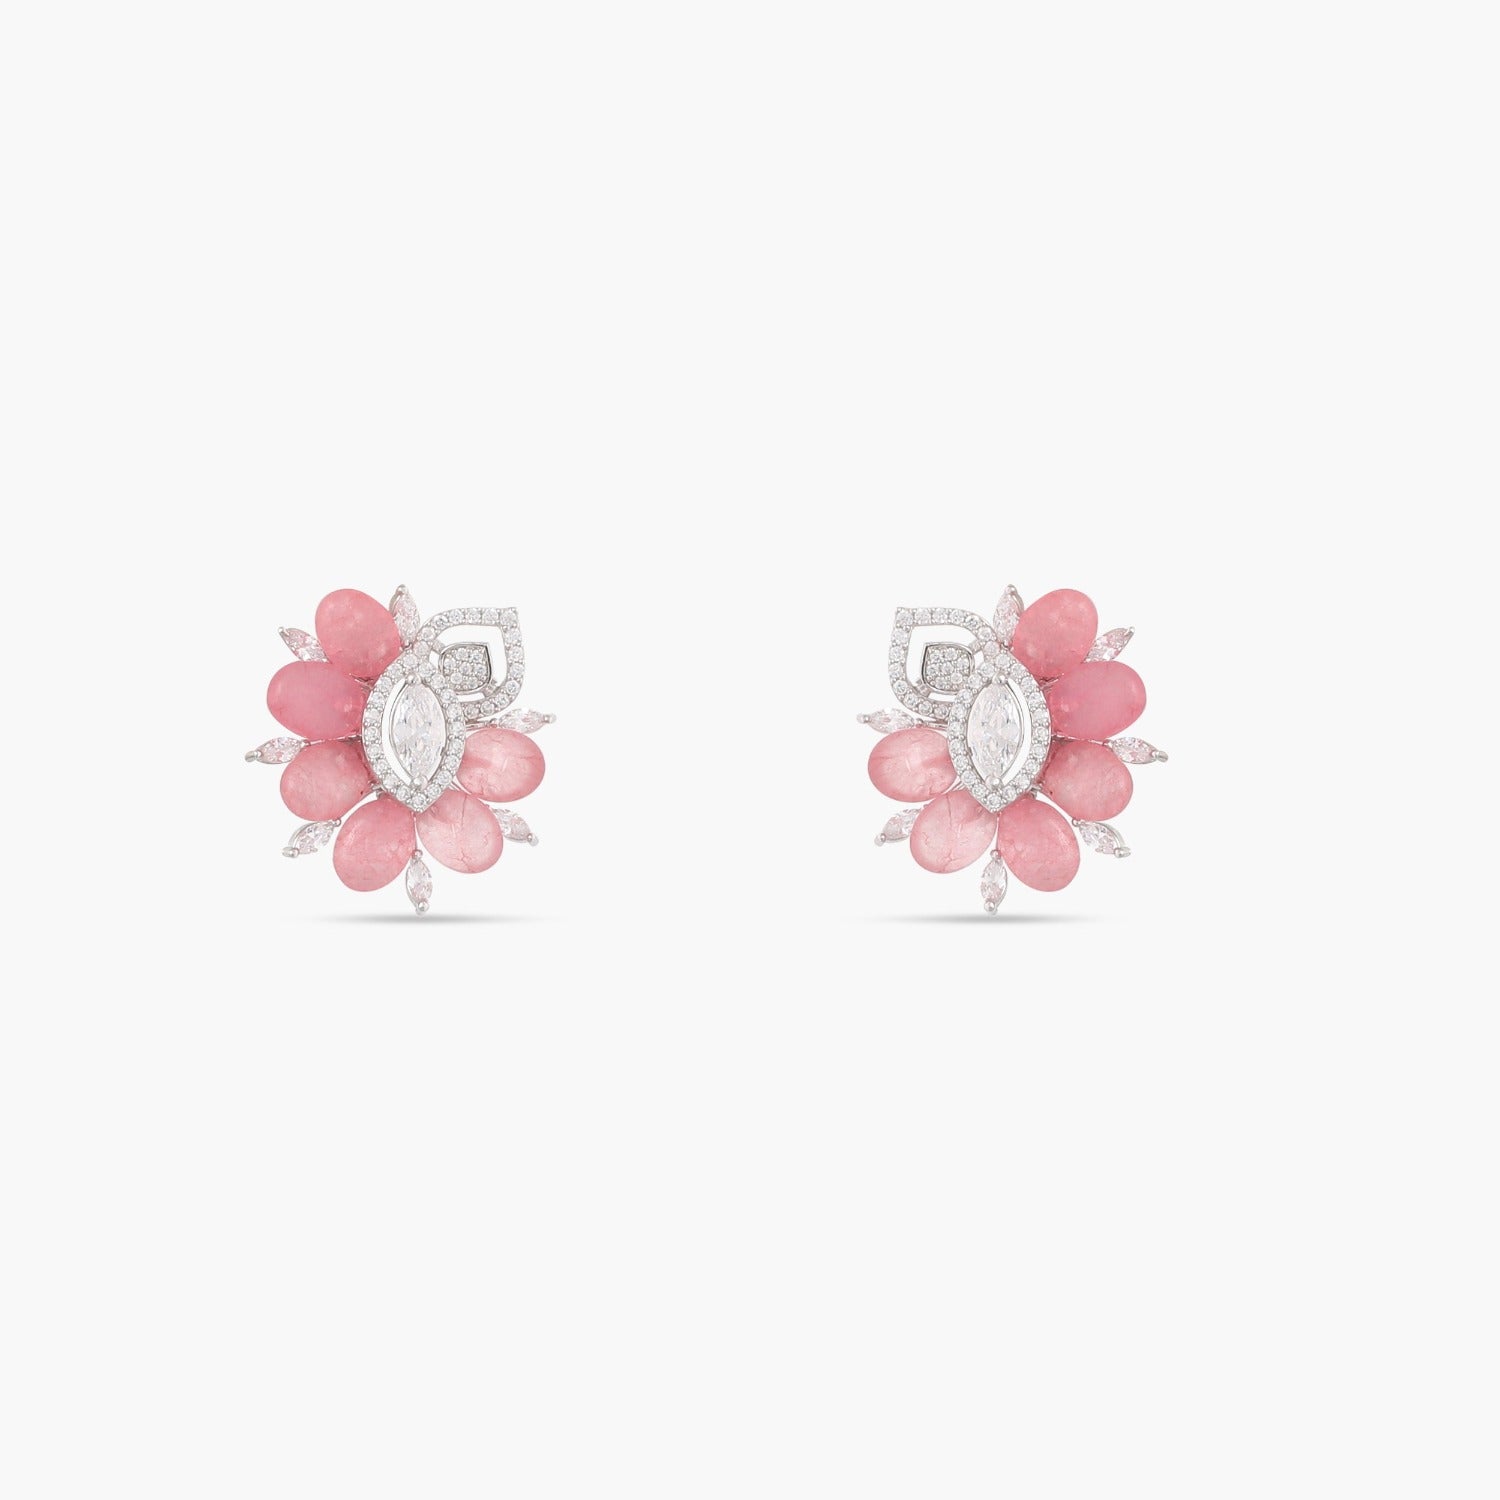 Garden Blooms Pink beads and CZ Stud Earrings